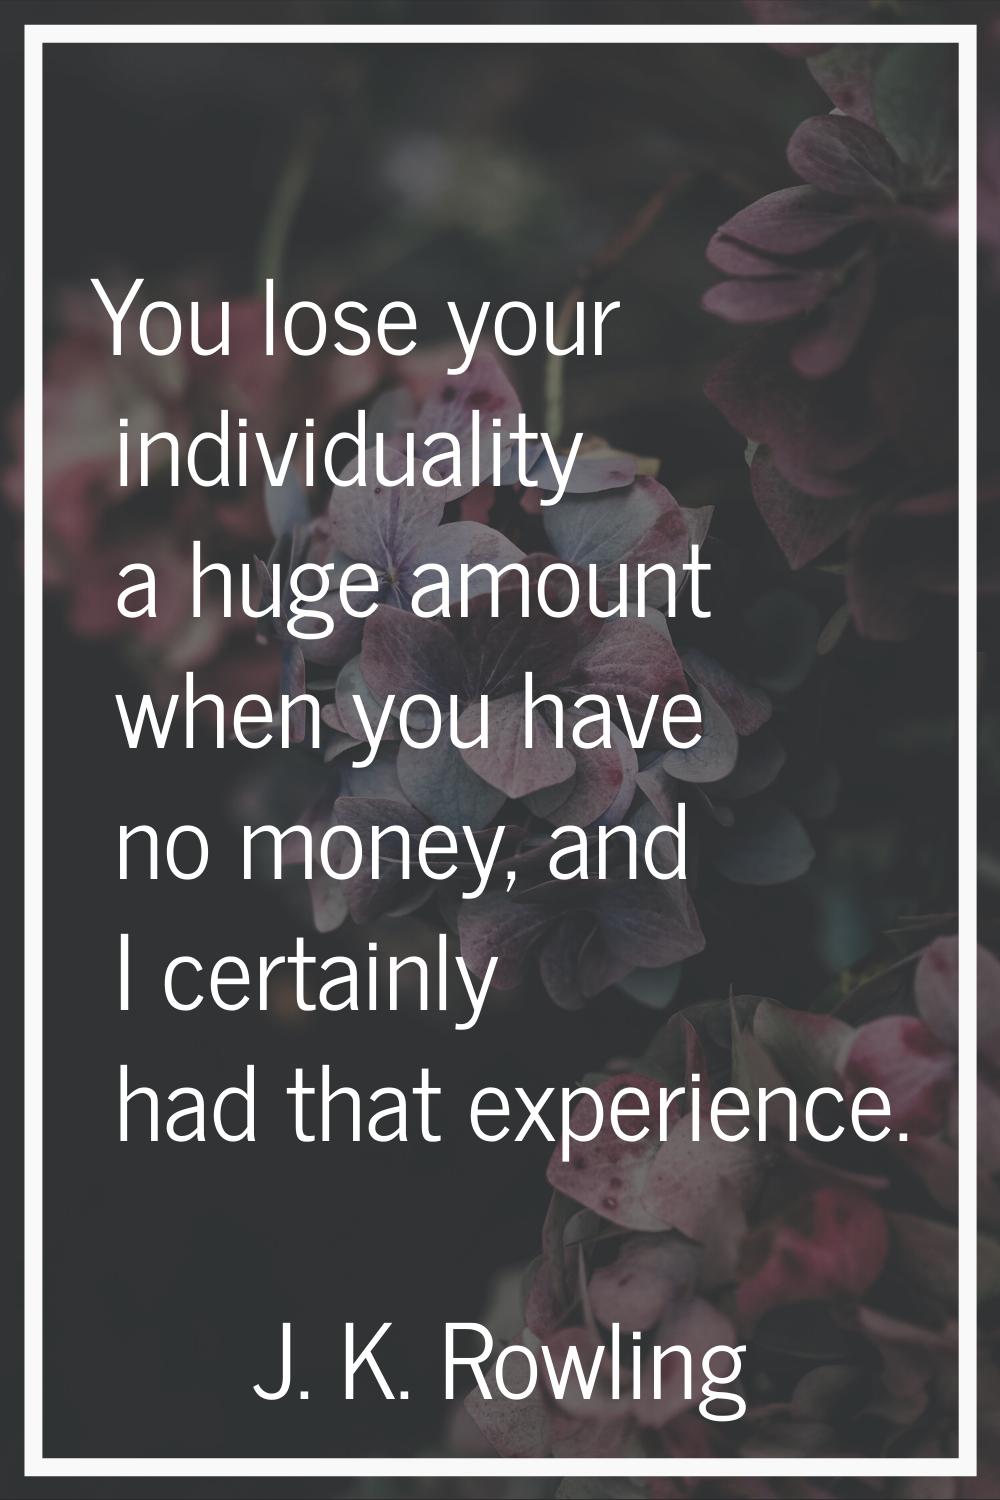 You lose your individuality a huge amount when you have no money, and I certainly had that experien